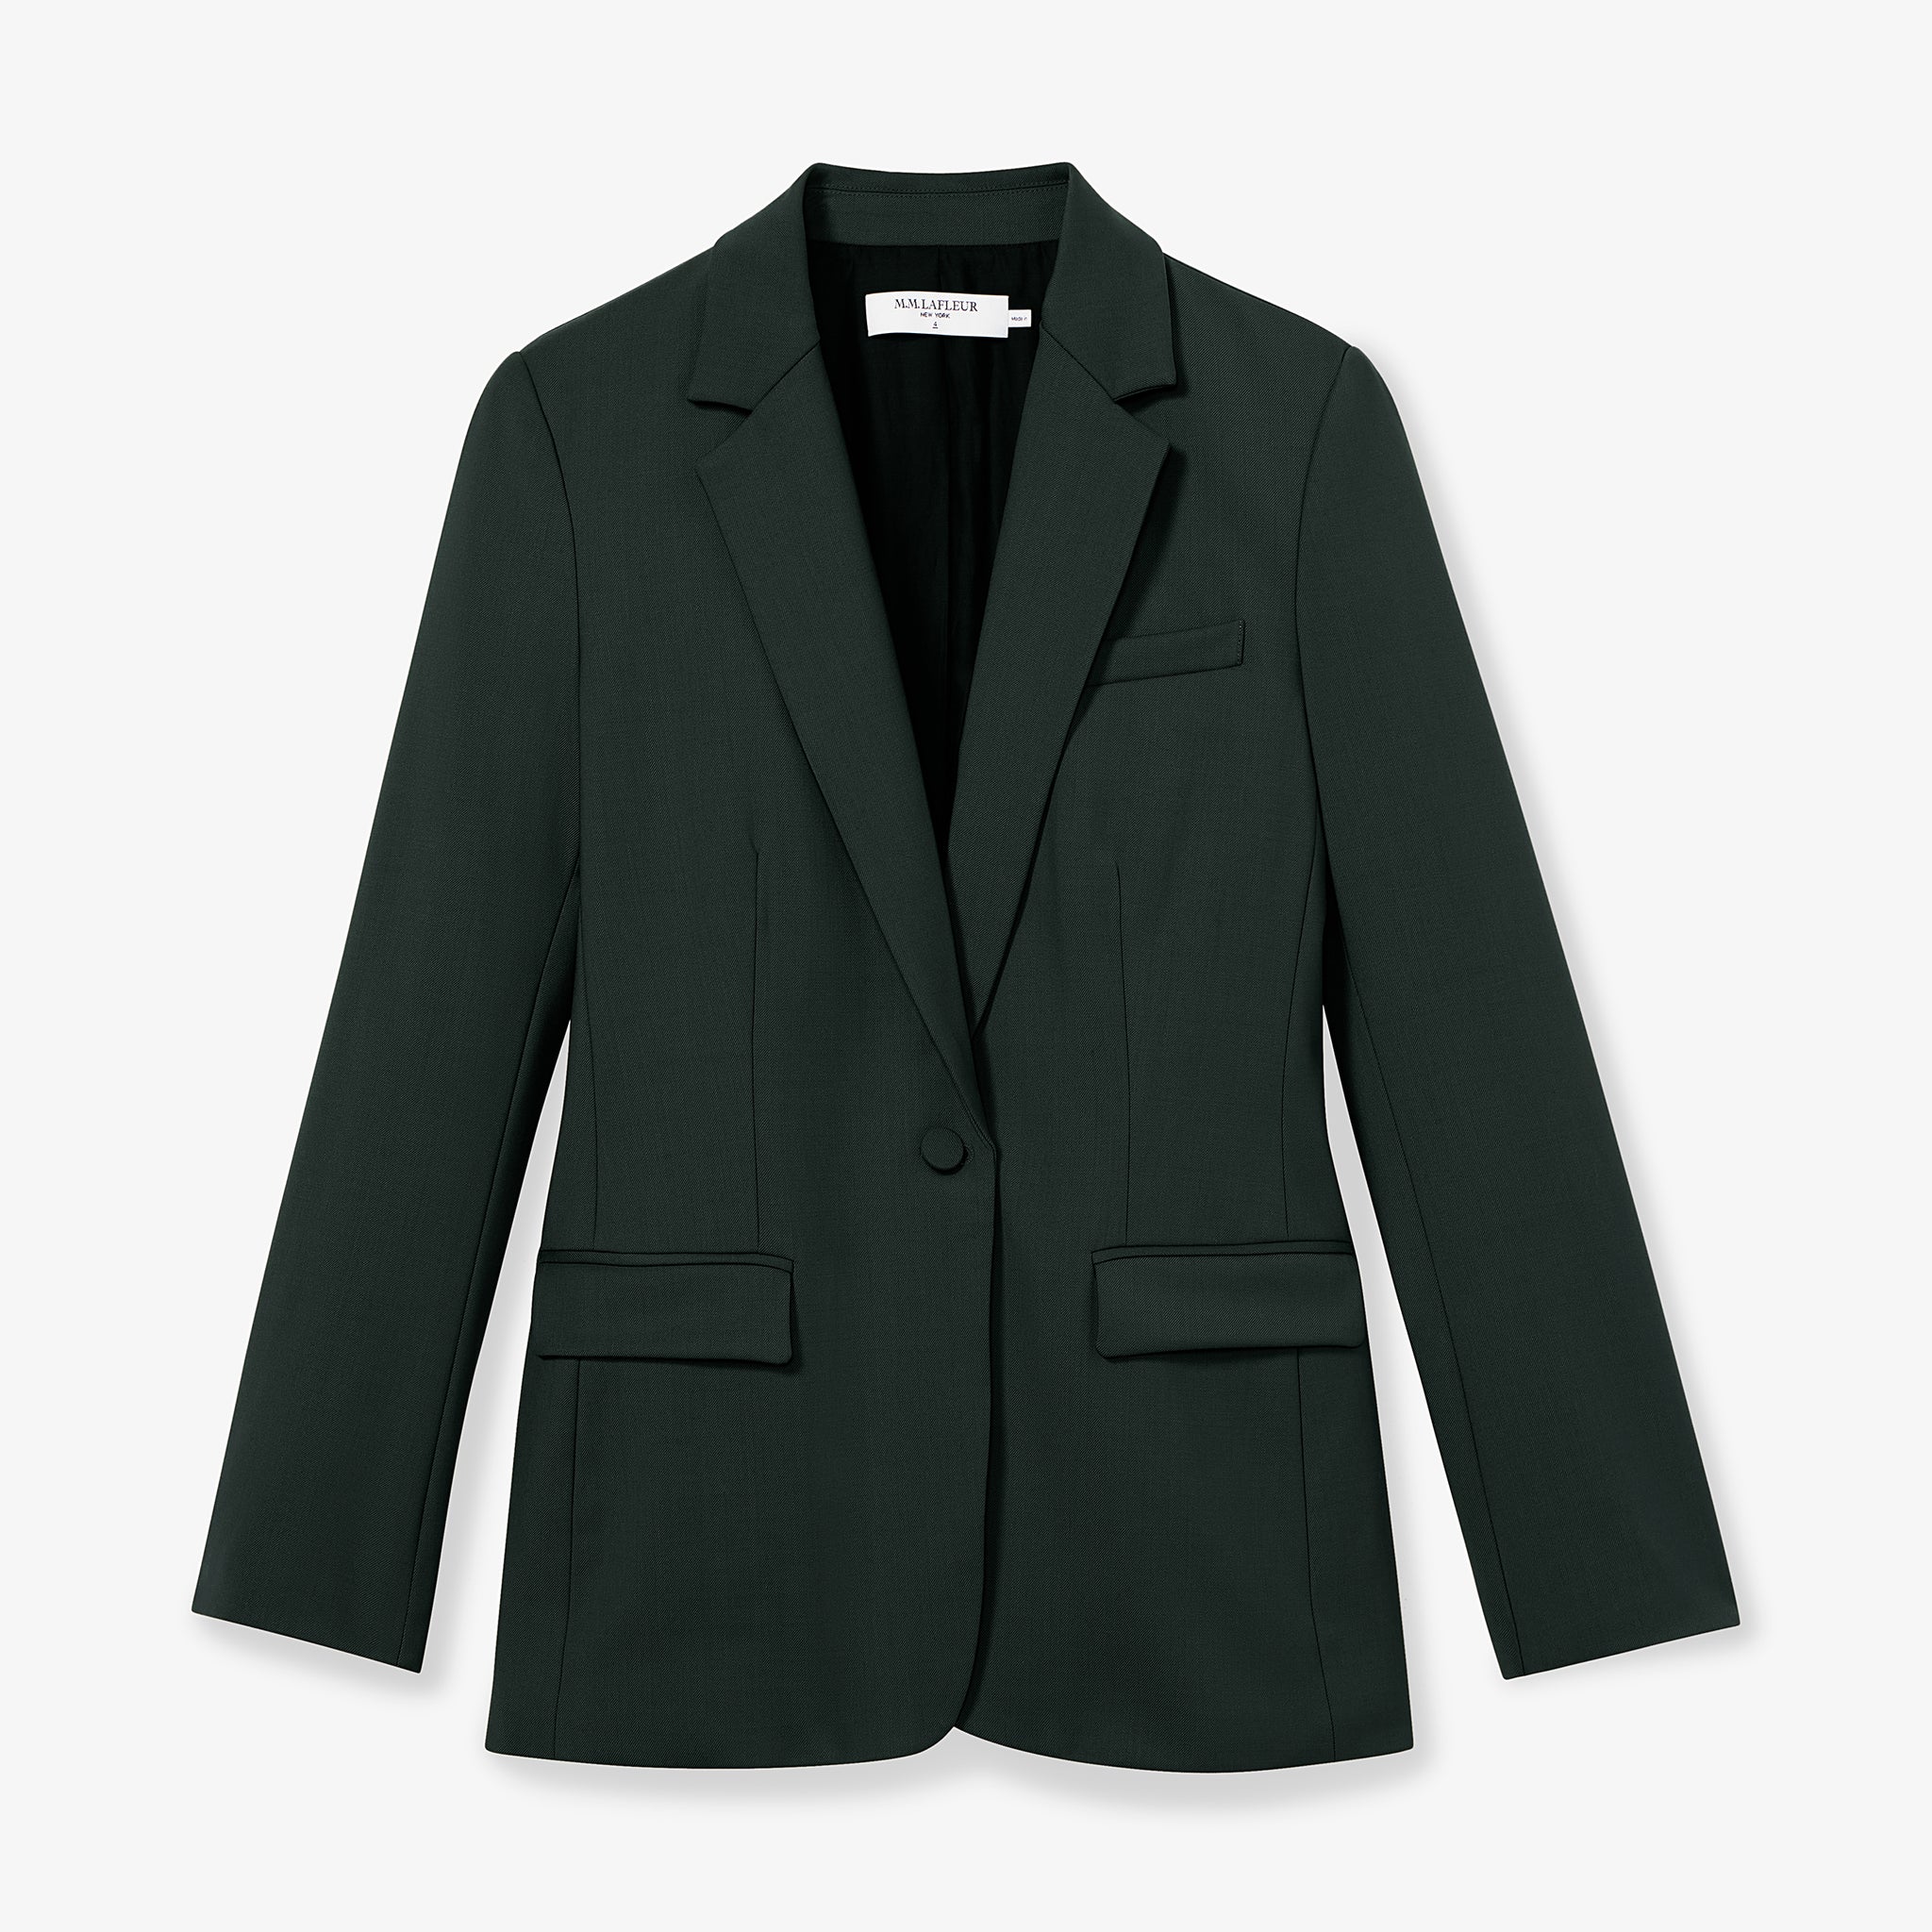 Packshot image of the yiyan blazer in forest